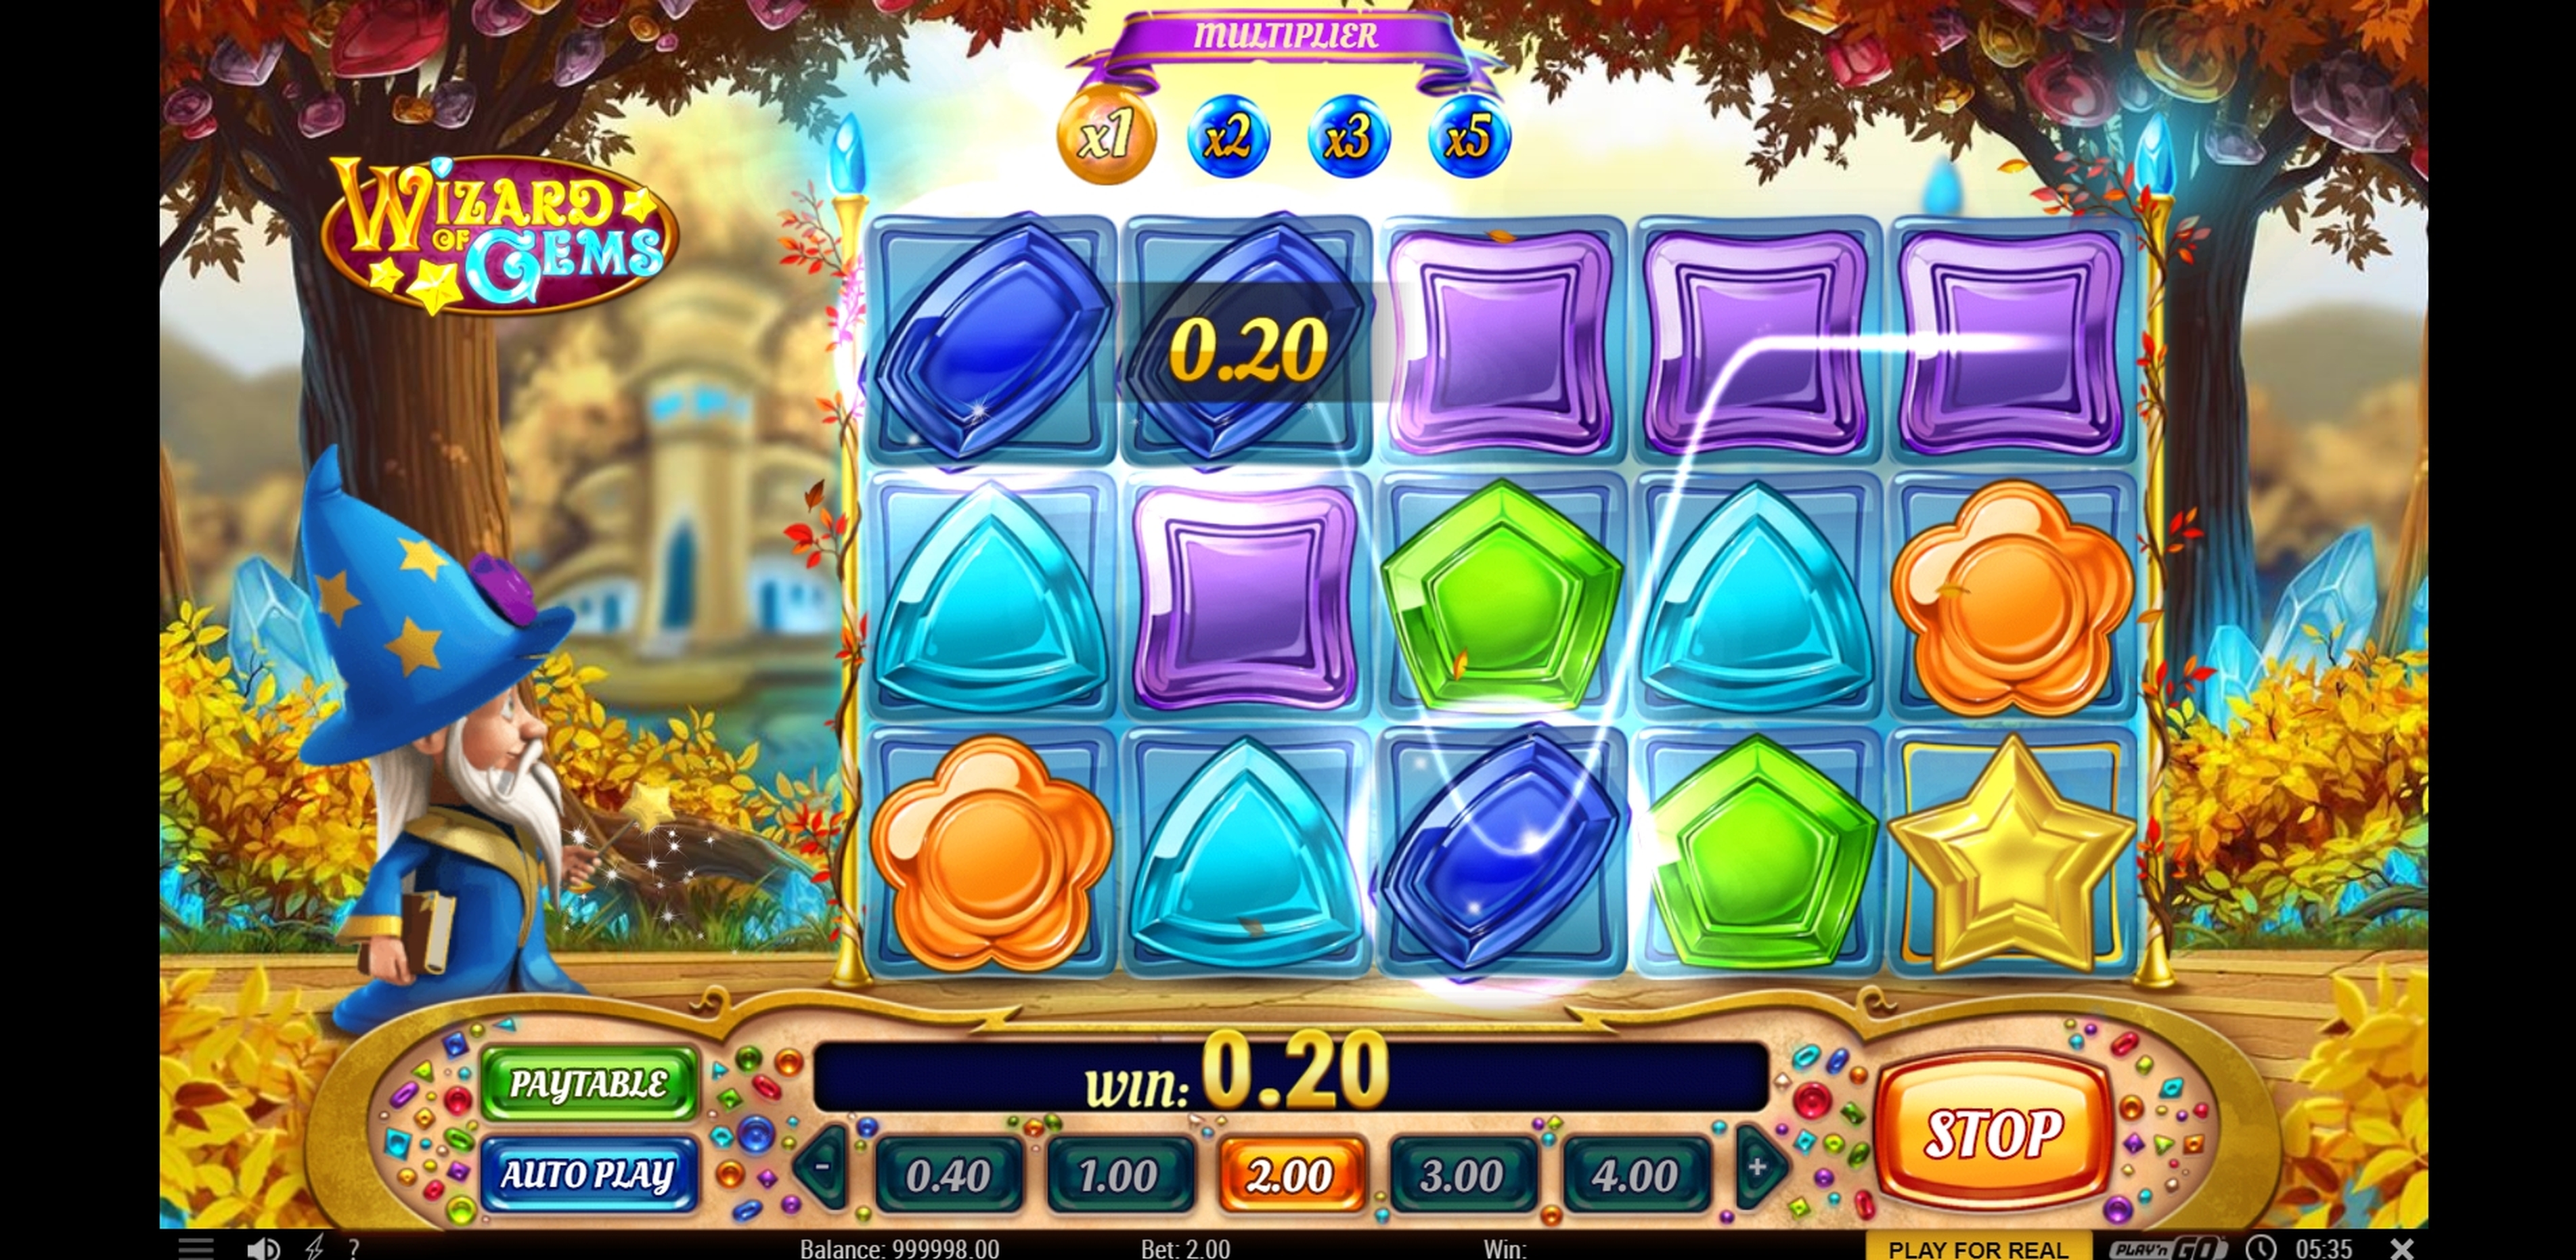 Win Money in Wizard of Gems Free Slot Game by Playn GO